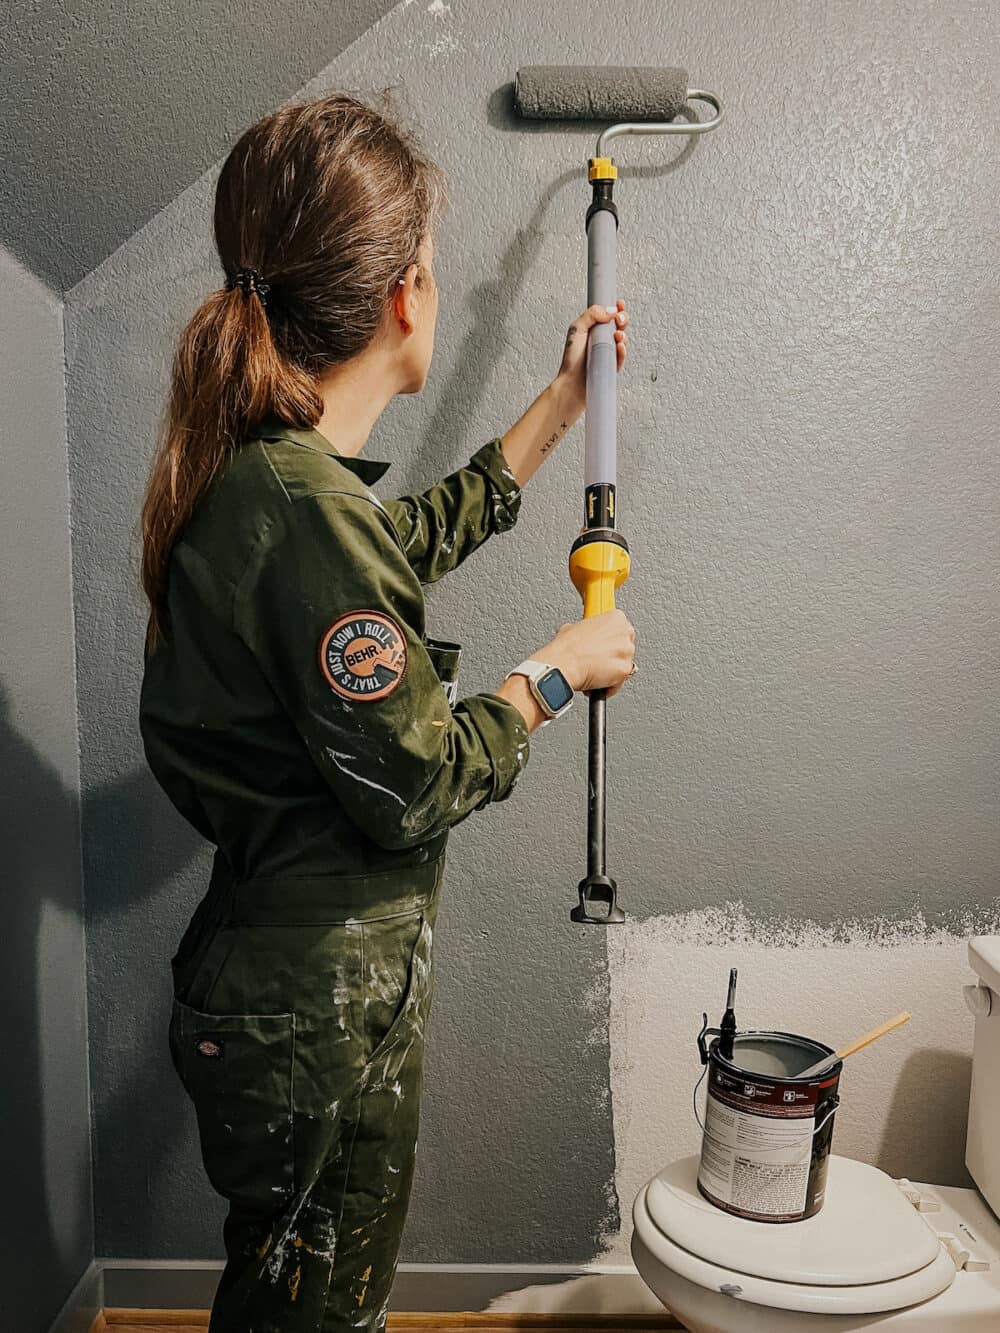 woman painting walls using an EZ roller from wagner